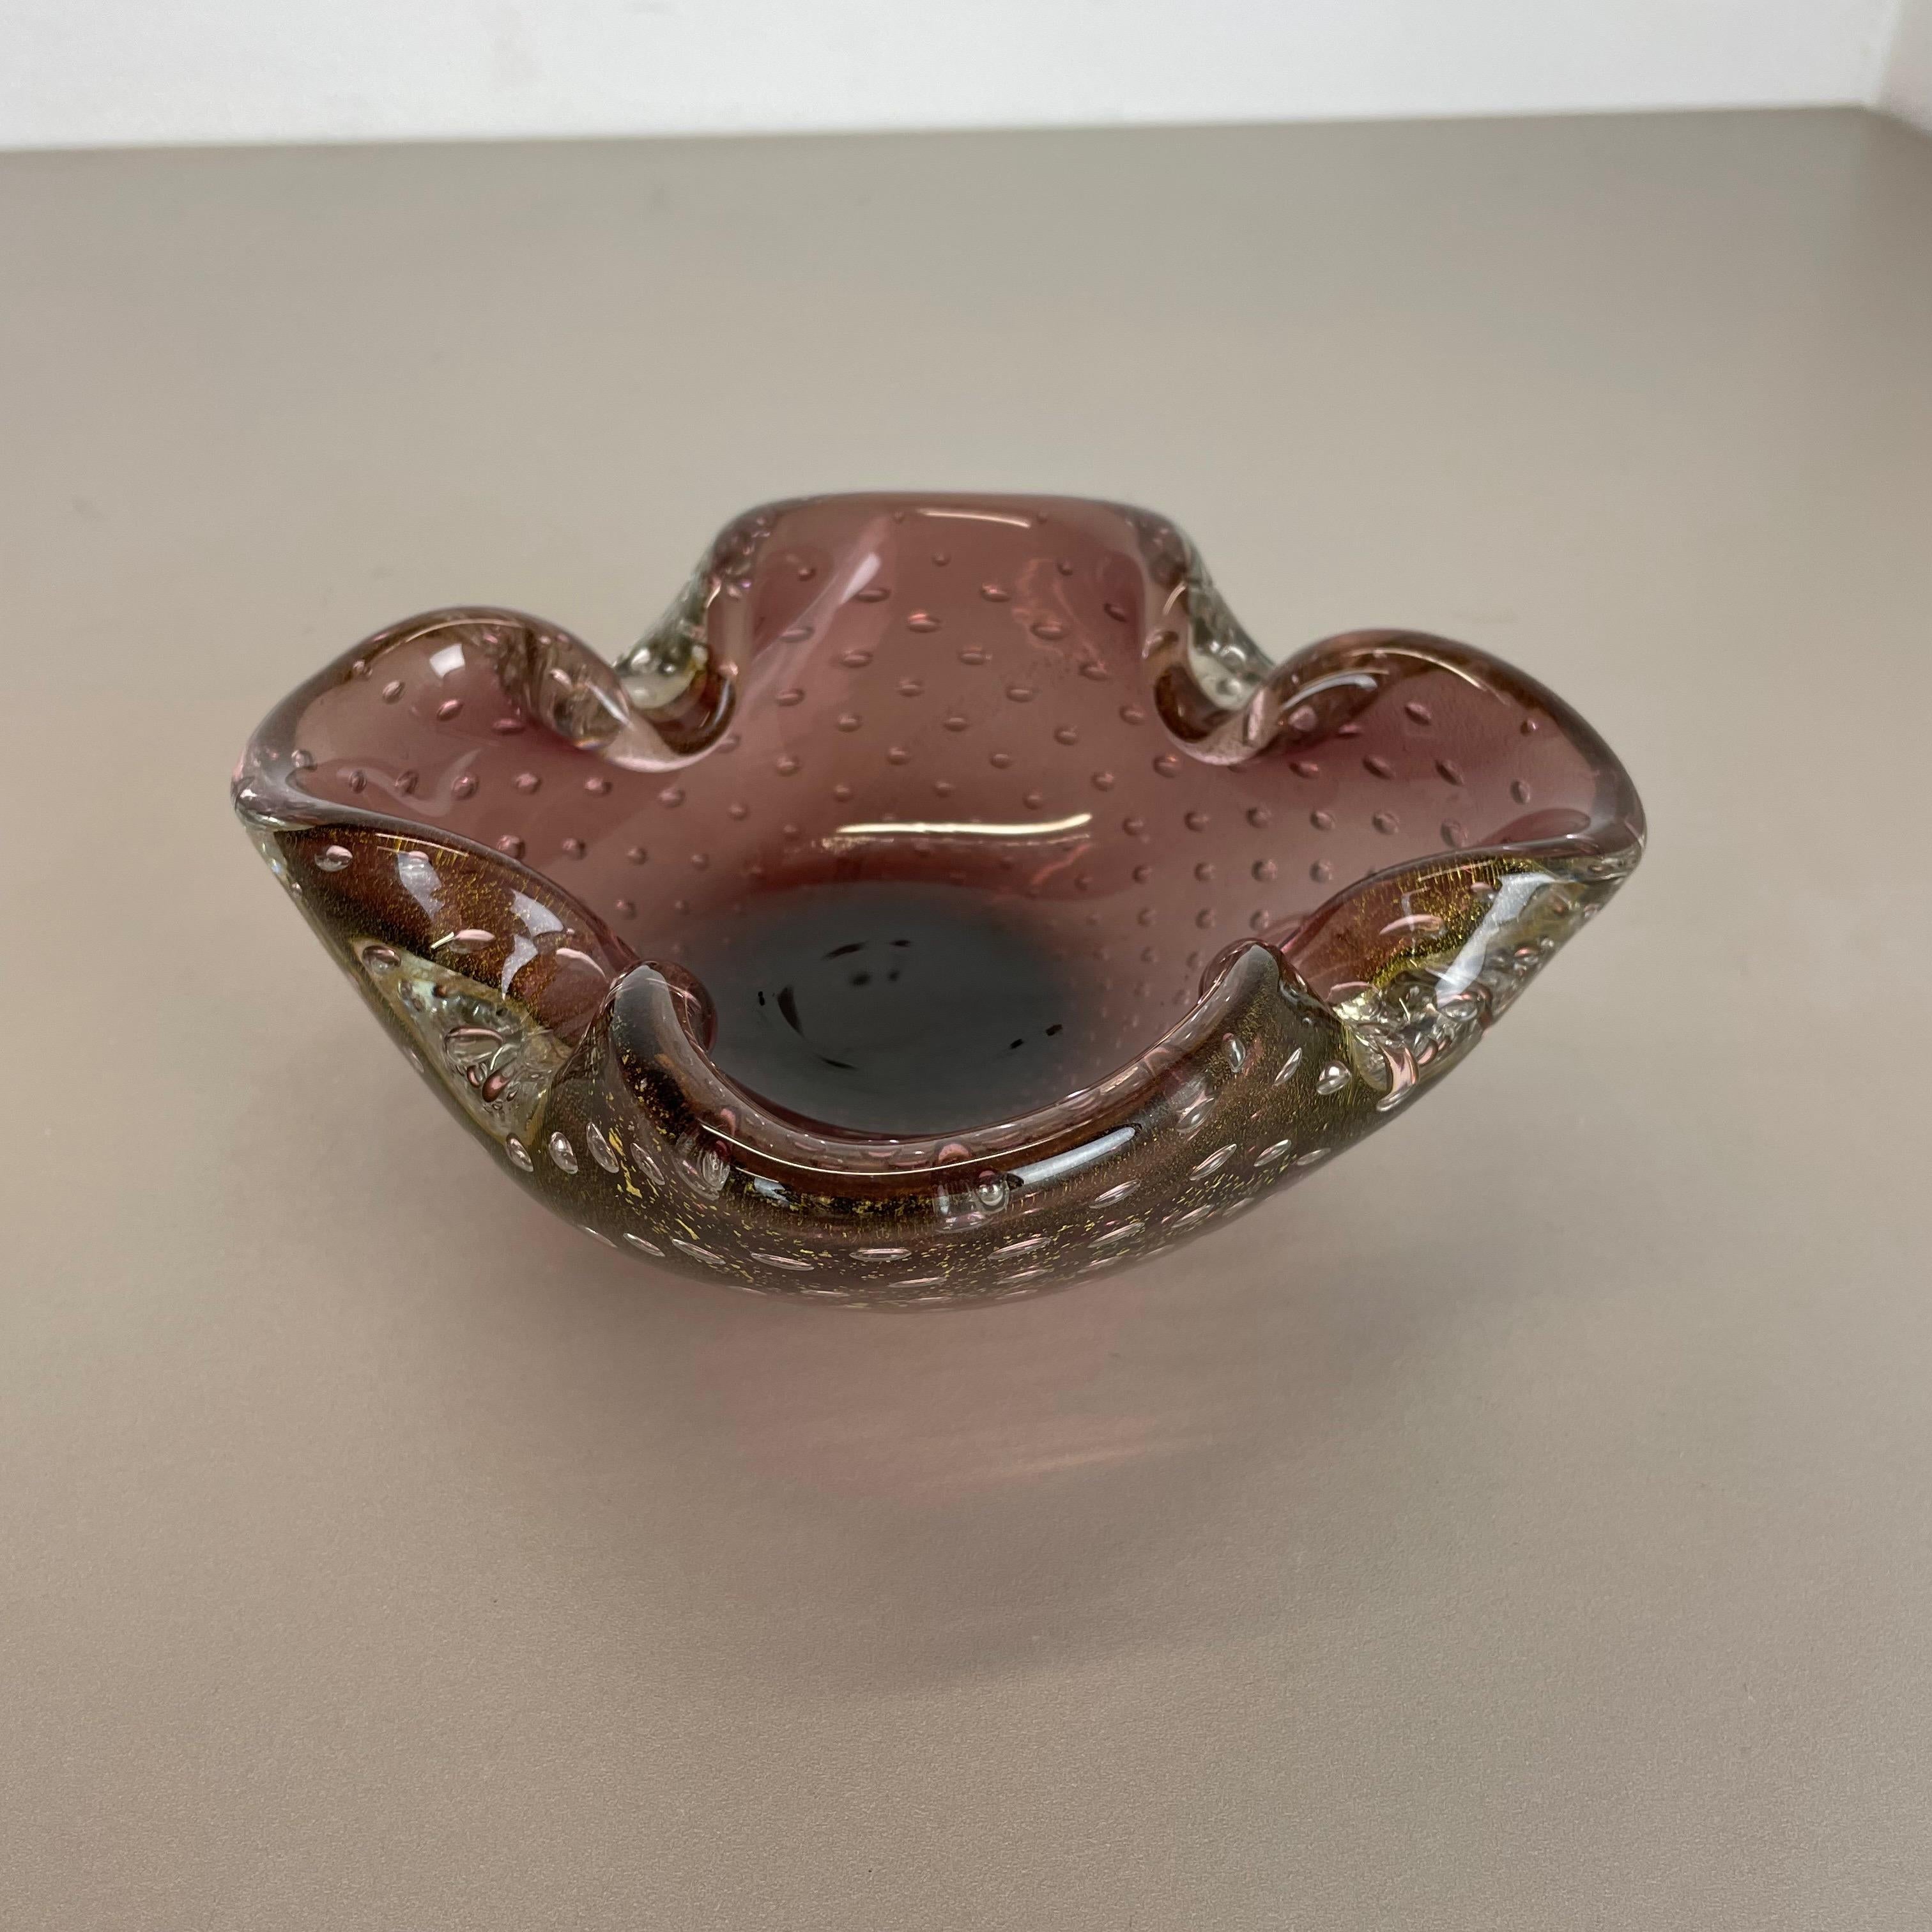 Article:

Murano glass bowl, ashtray element


Origin:

Murano, Italy


Decade:

1970s



This original vintage glass bowl element, ash tray was produced in the 1970s in Murano, Italy. It is made in high quality Murano technique and